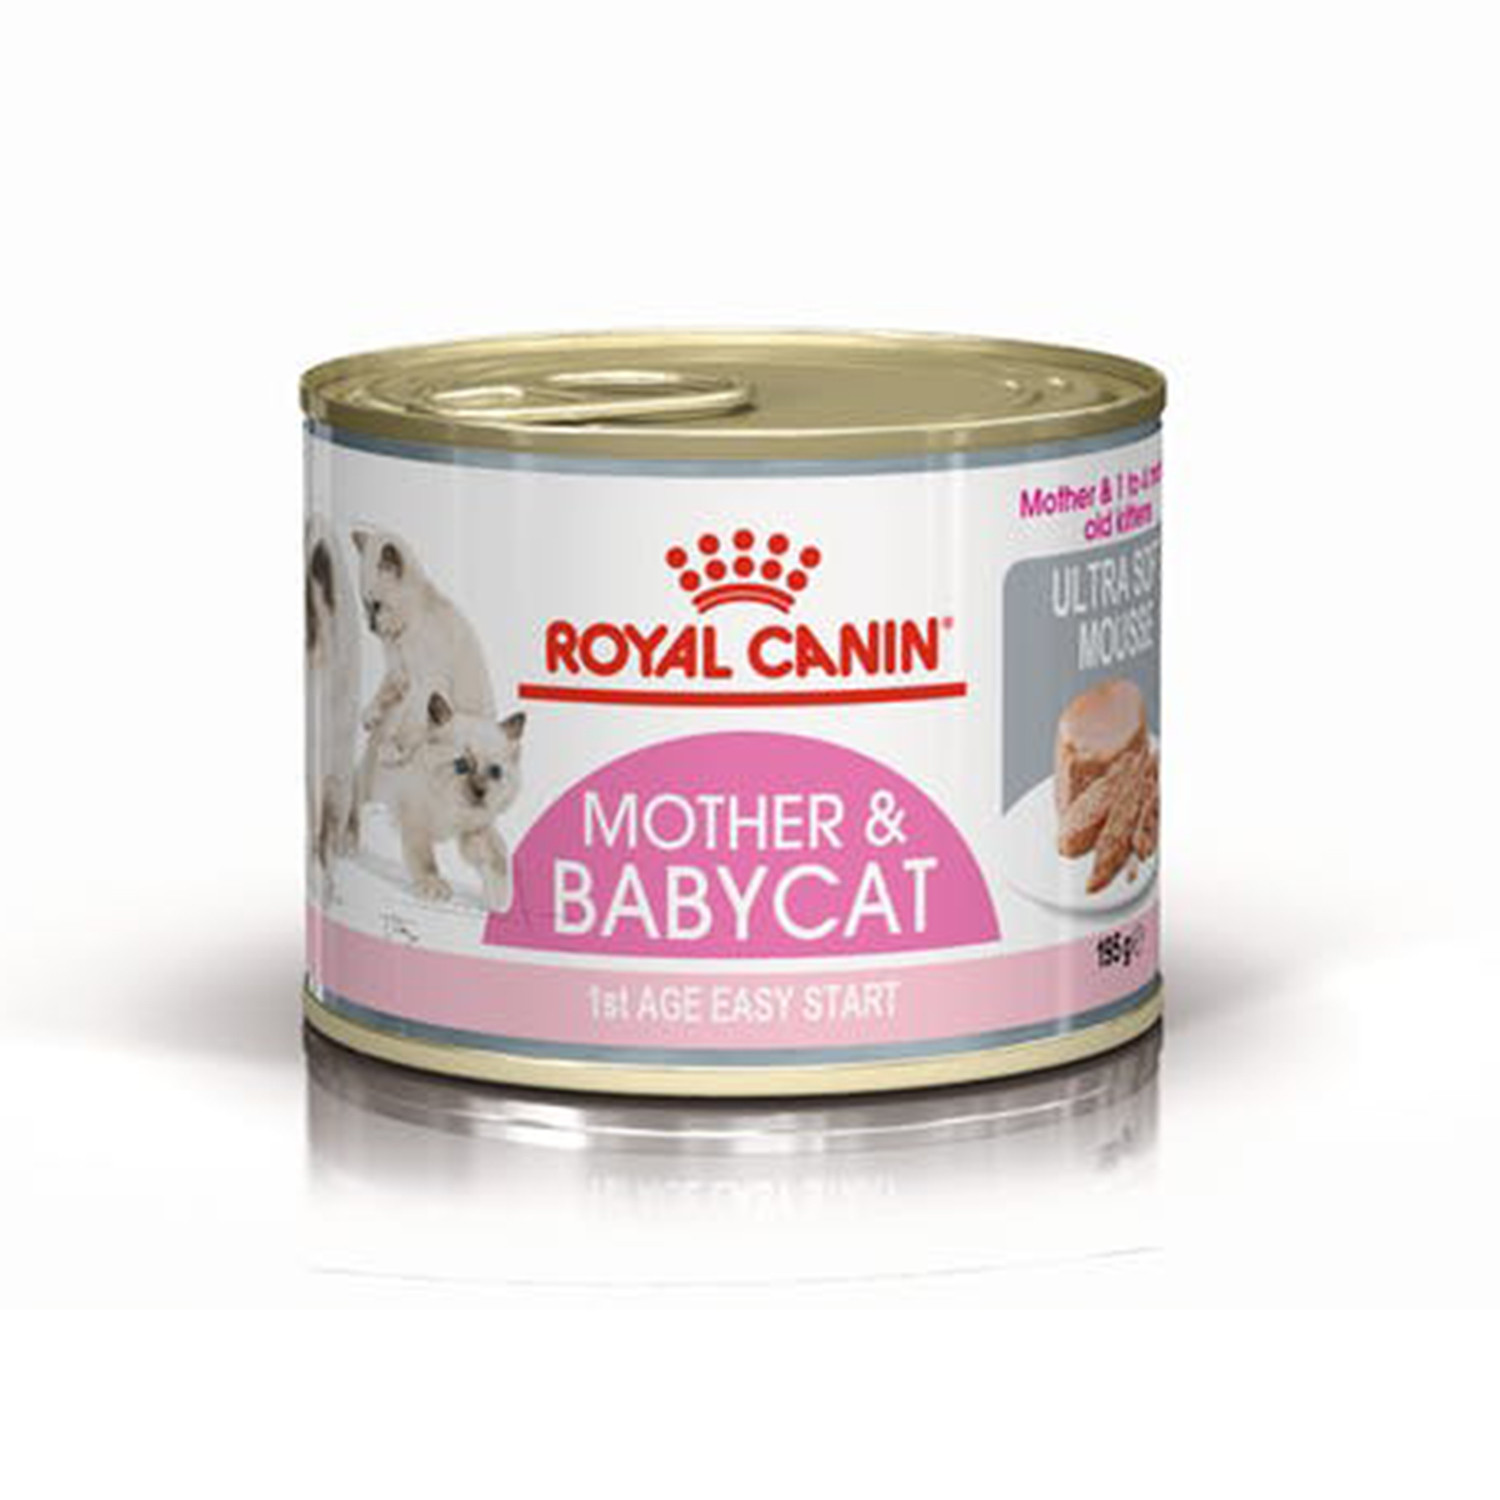 Fnh mother & babycat rc 195g